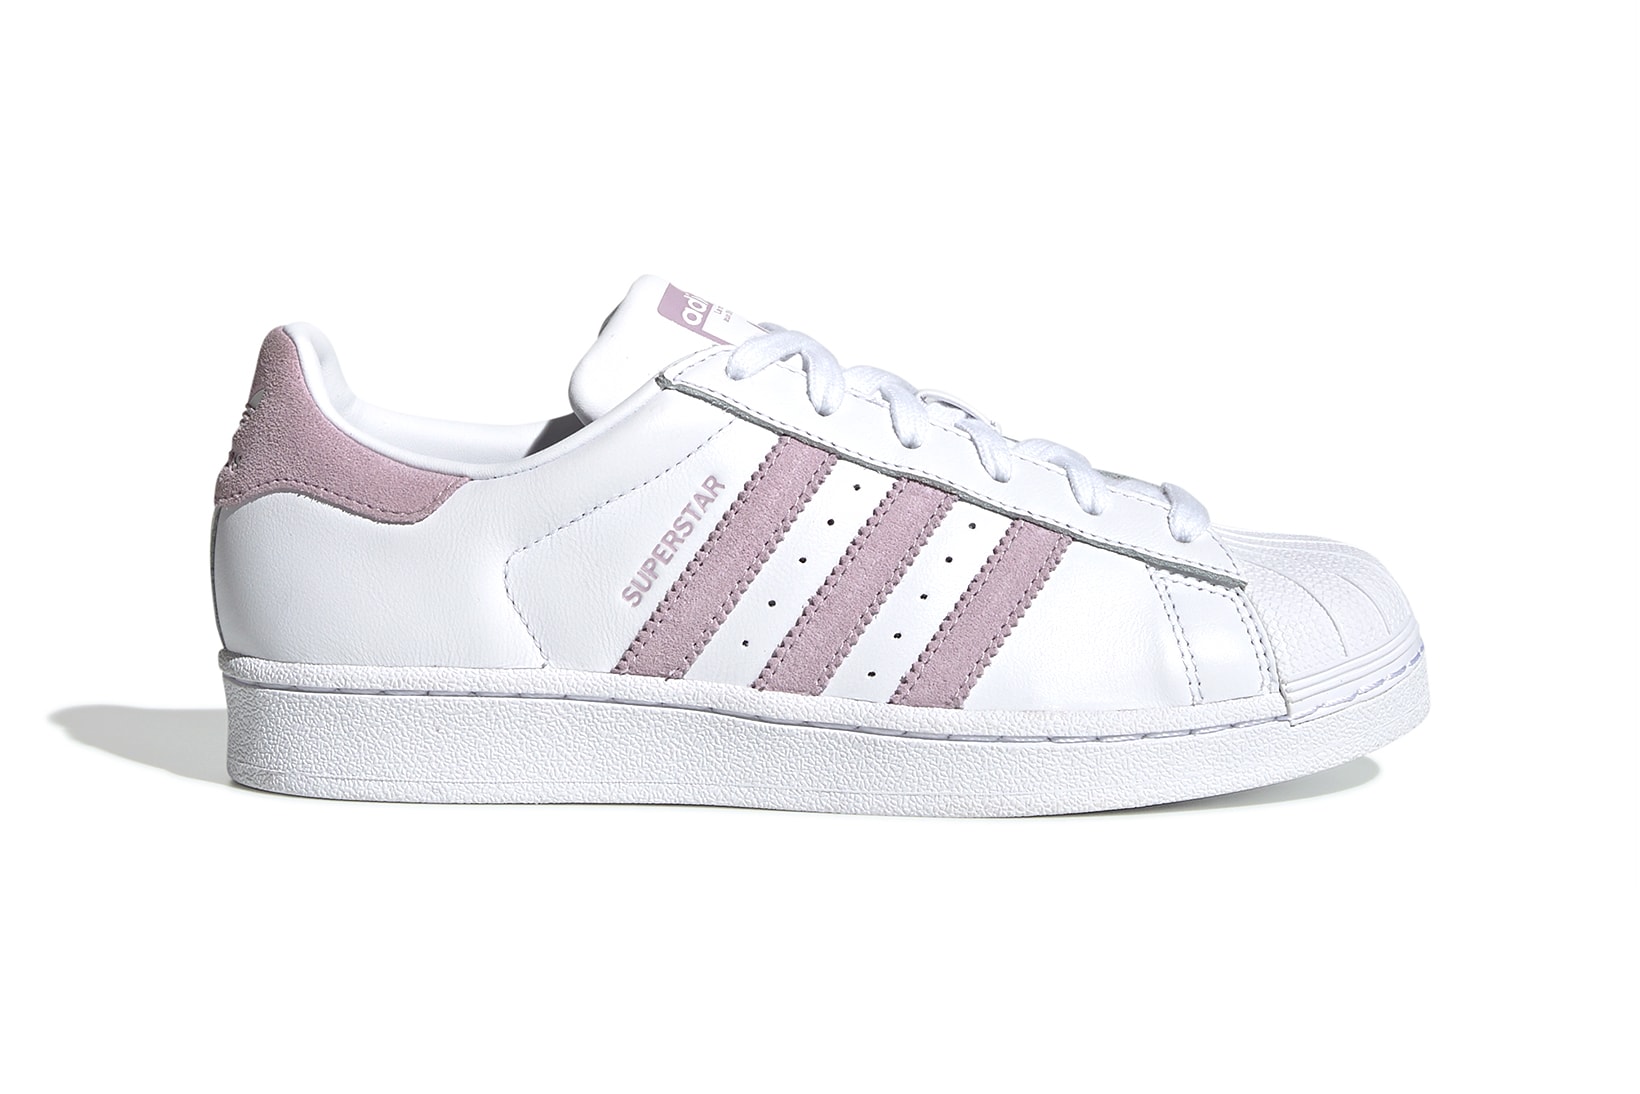 Styling my Adidas Superstars, The Sweetest Thing